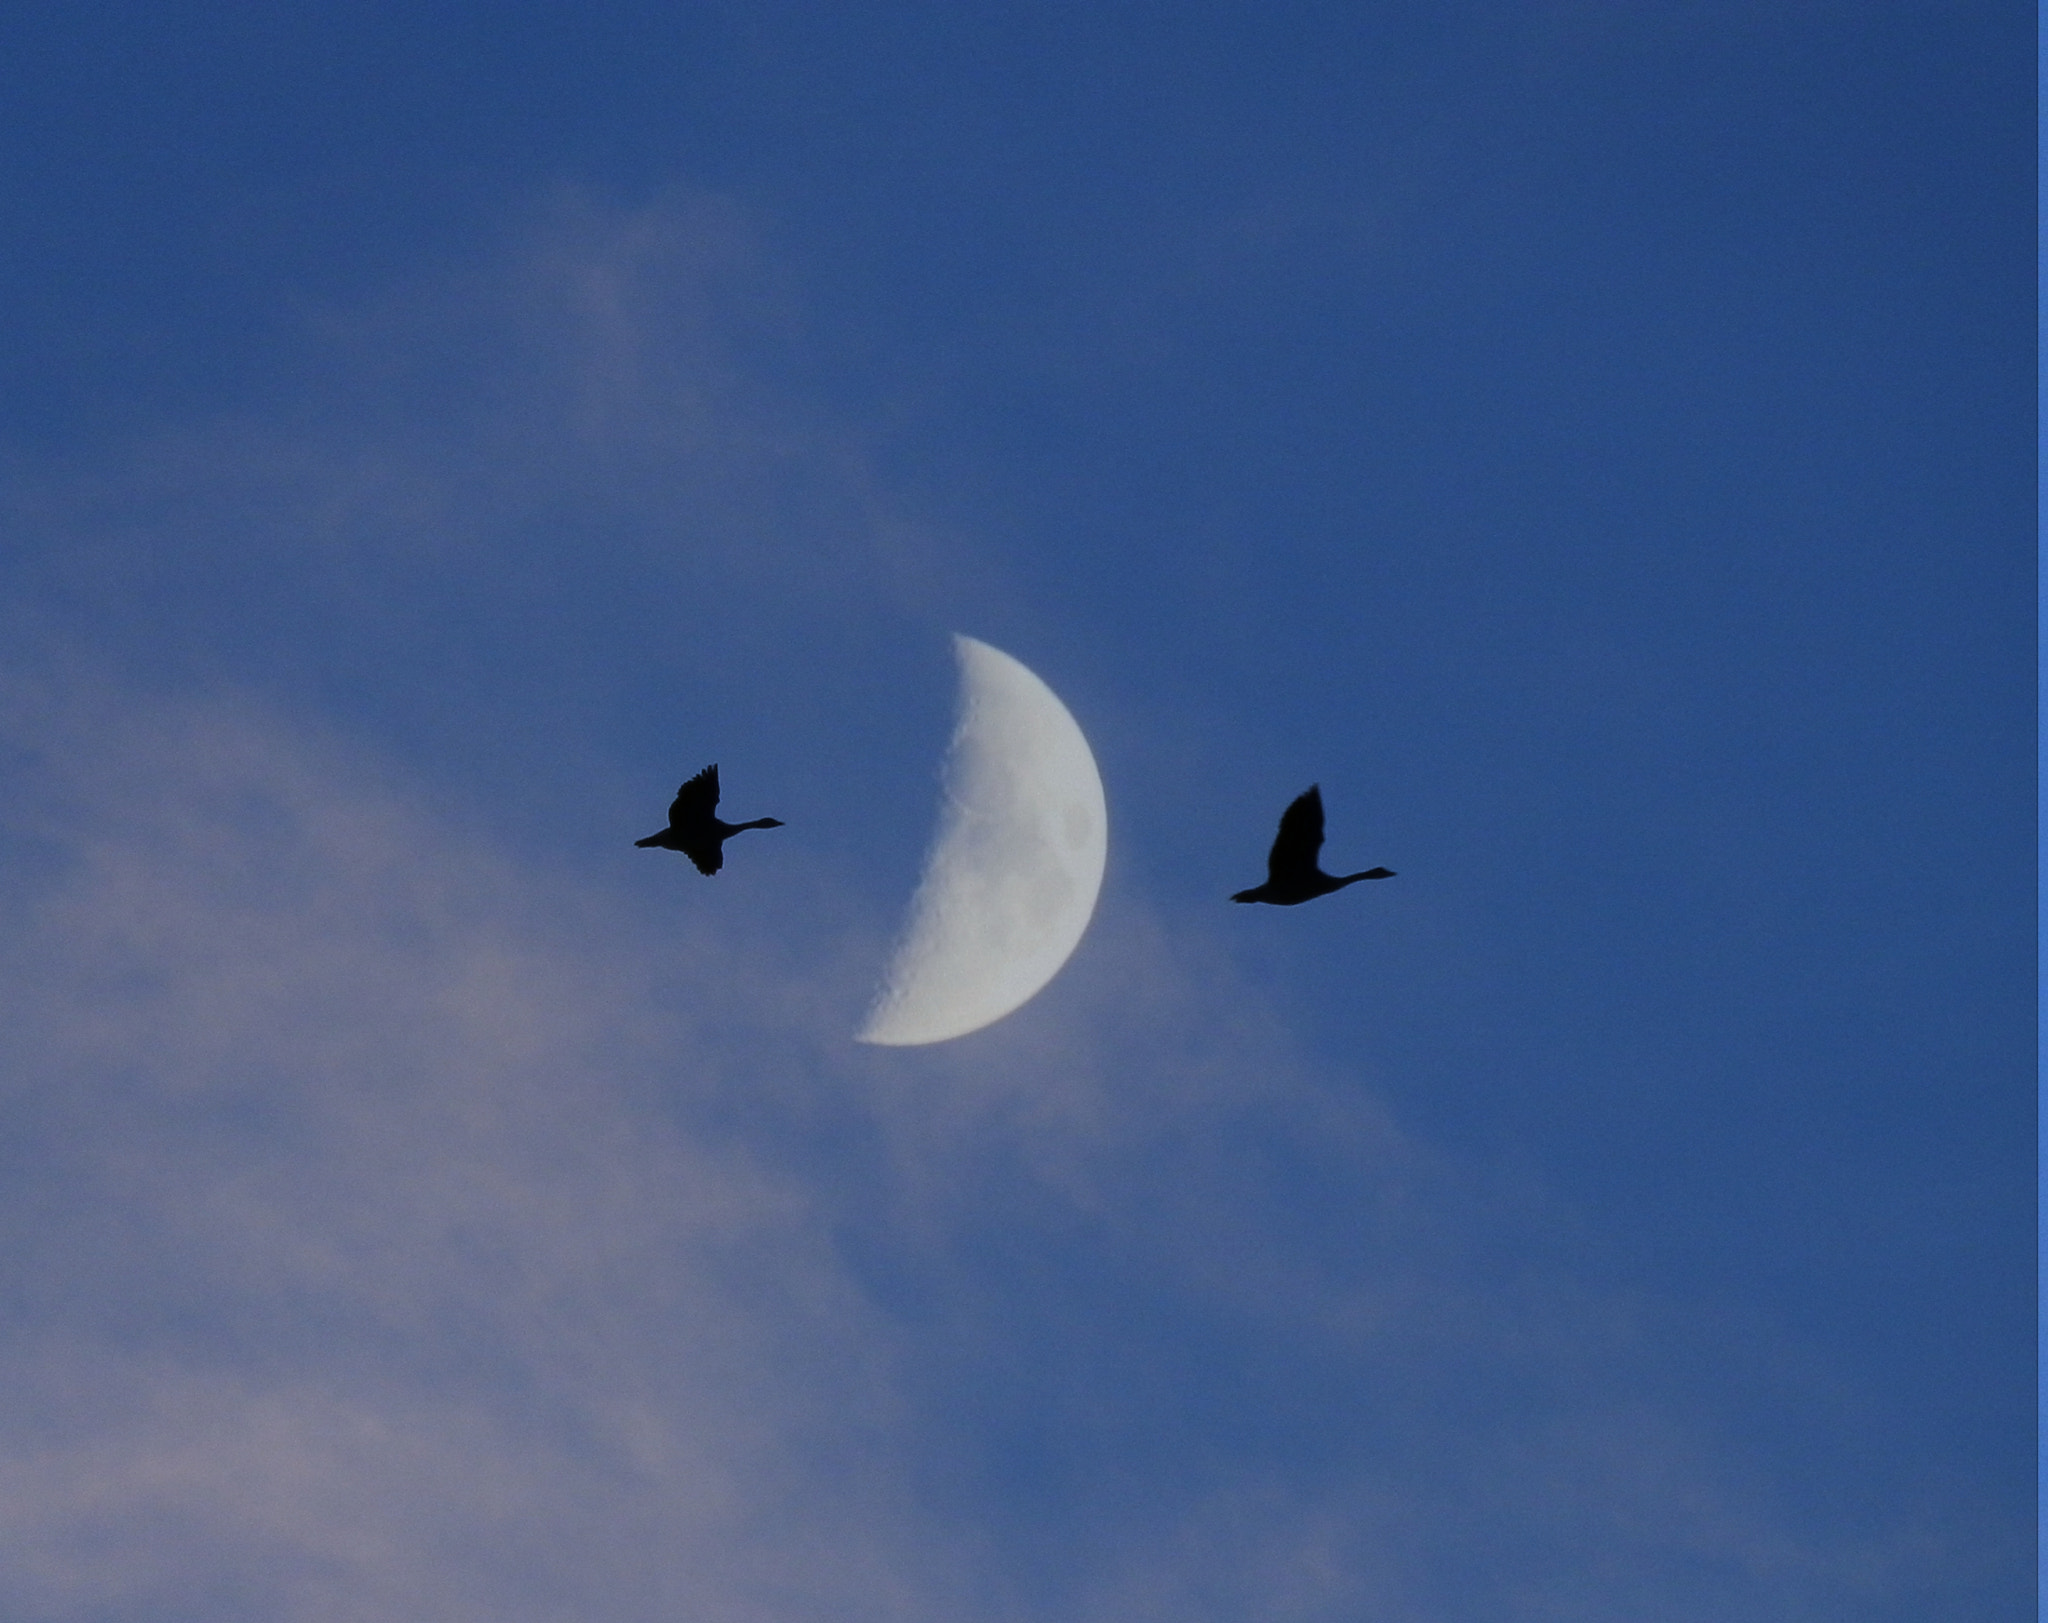 Olympus SP-610UZ sample photo. Birds soaring by the crescent moon photography